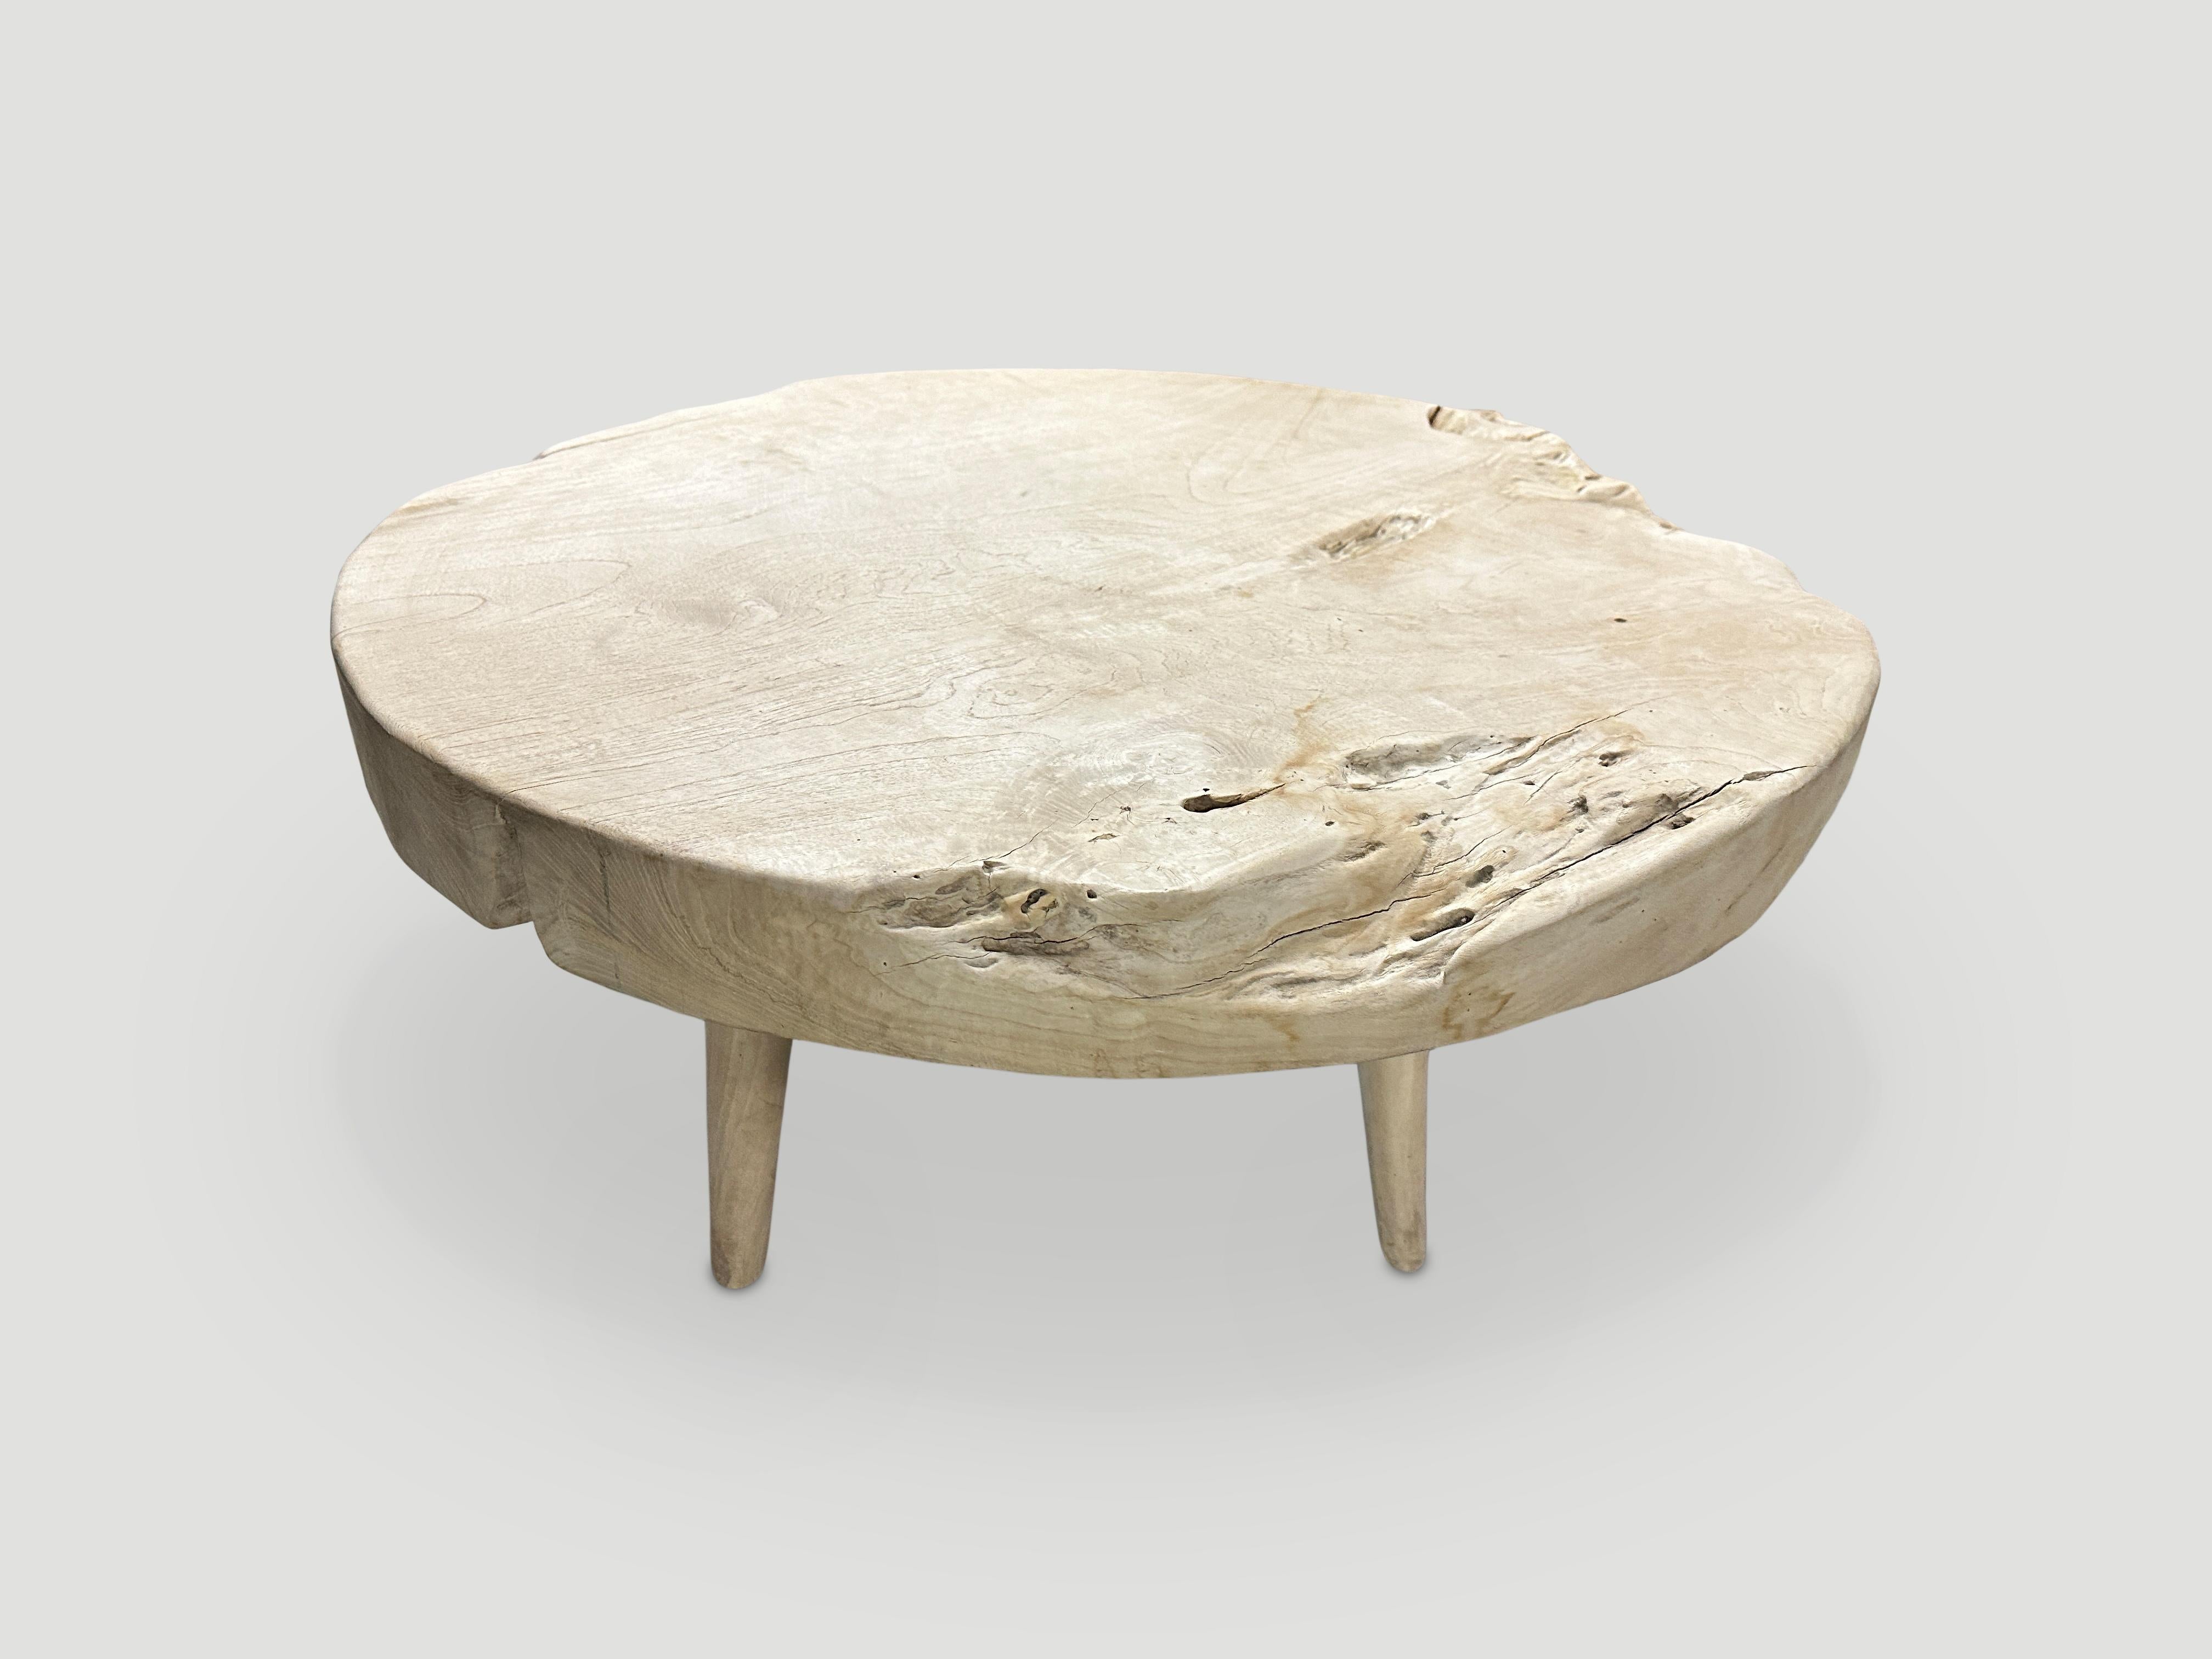 Impressive three inch single slab reclaimed teak wood coffee table. We bleached the teak and added a light white wash revealing the beautiful wood grain. Floating on mid century style legs. Organic with a twist. 

The St. Barts Collection features